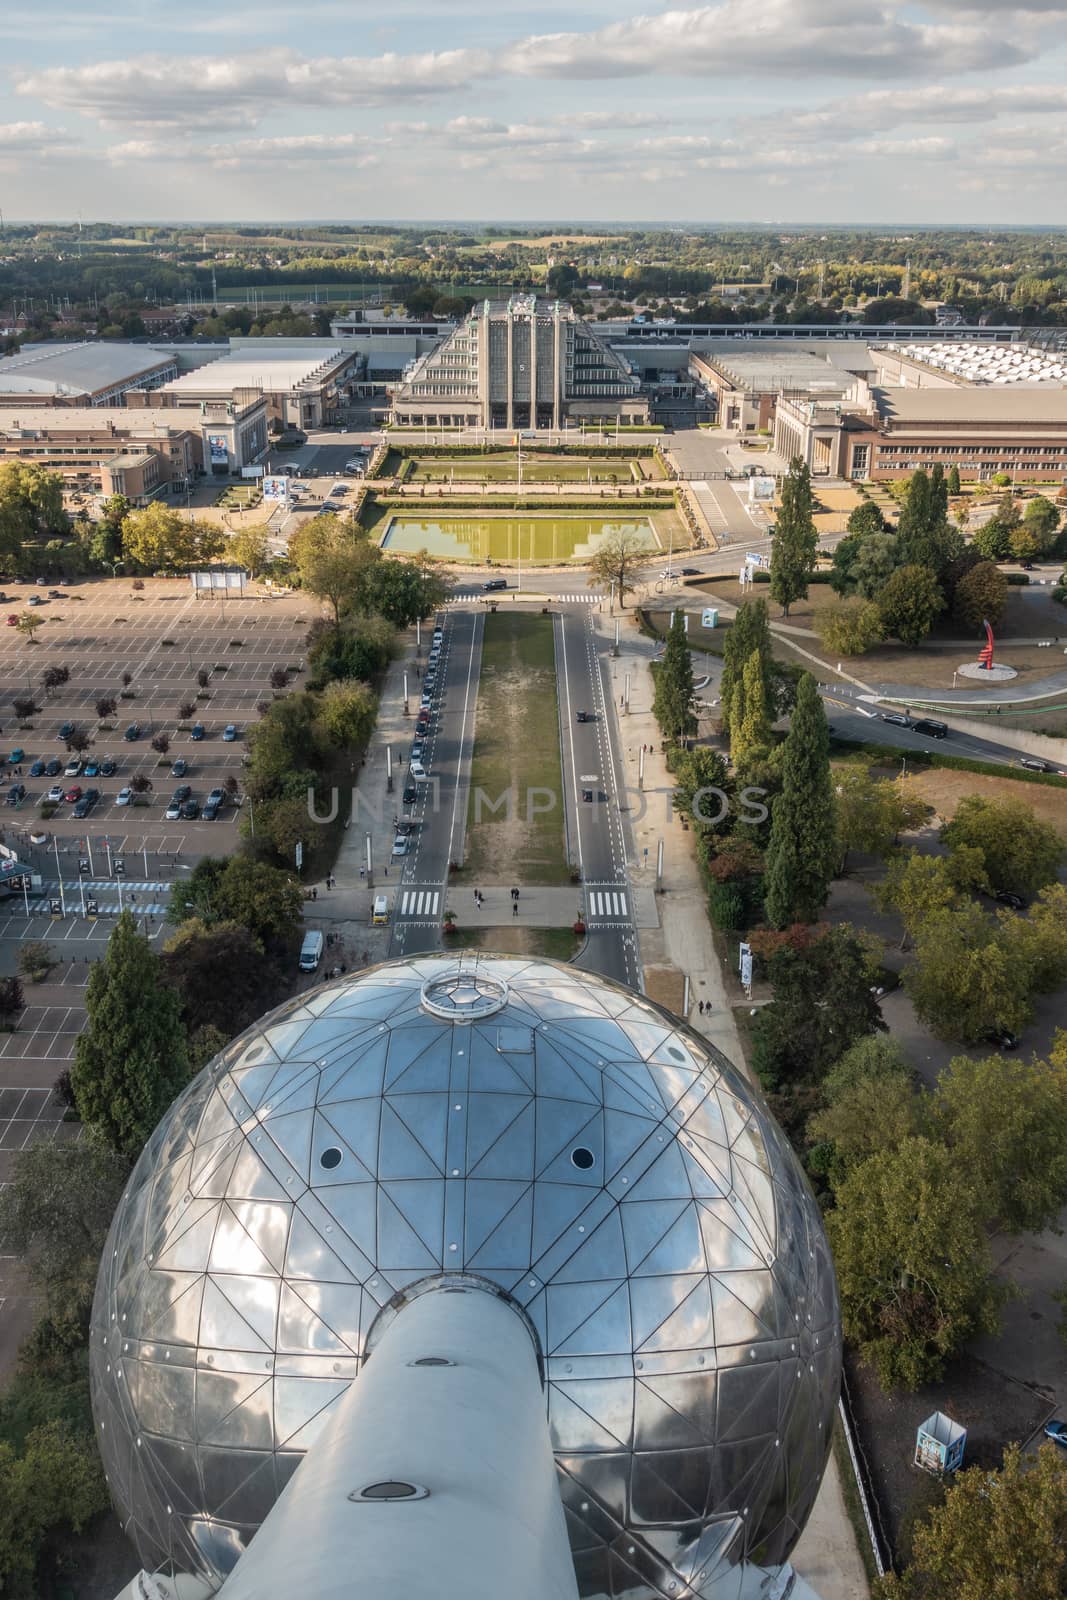 Brussels, Belgium - September 25, 2018: The historic world expo halls shot from top of the Atomium monument. Green belt and cloudy sky on horizon. One of the Atomium spheres up front.